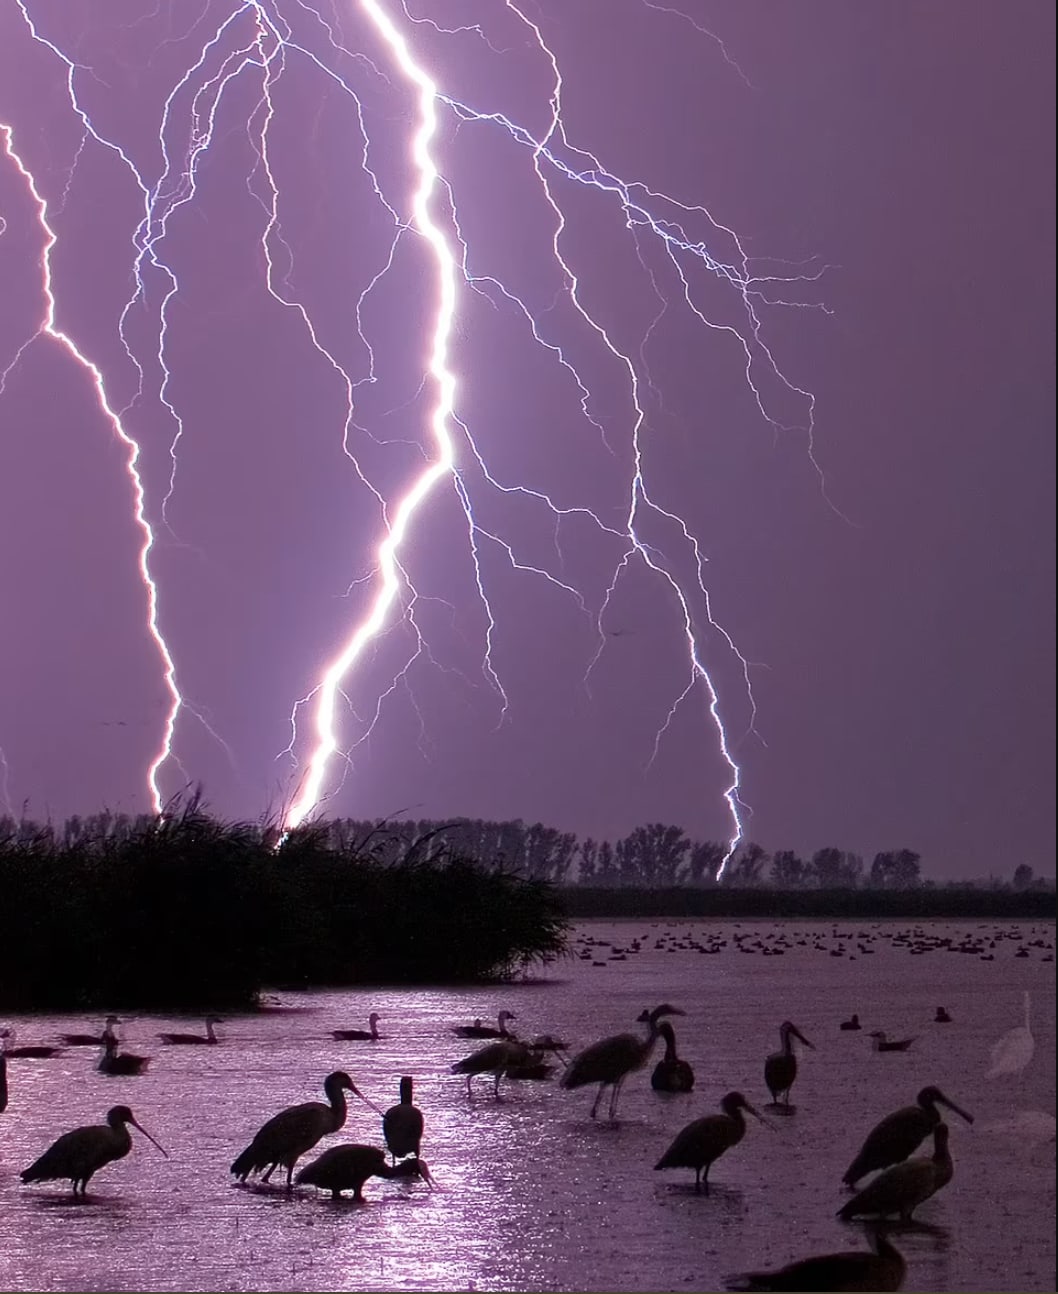 Lightning flashes above birds on a lake in Kiskunsag National Park, Hungary. The image is purple because of the short wavelength of lightning